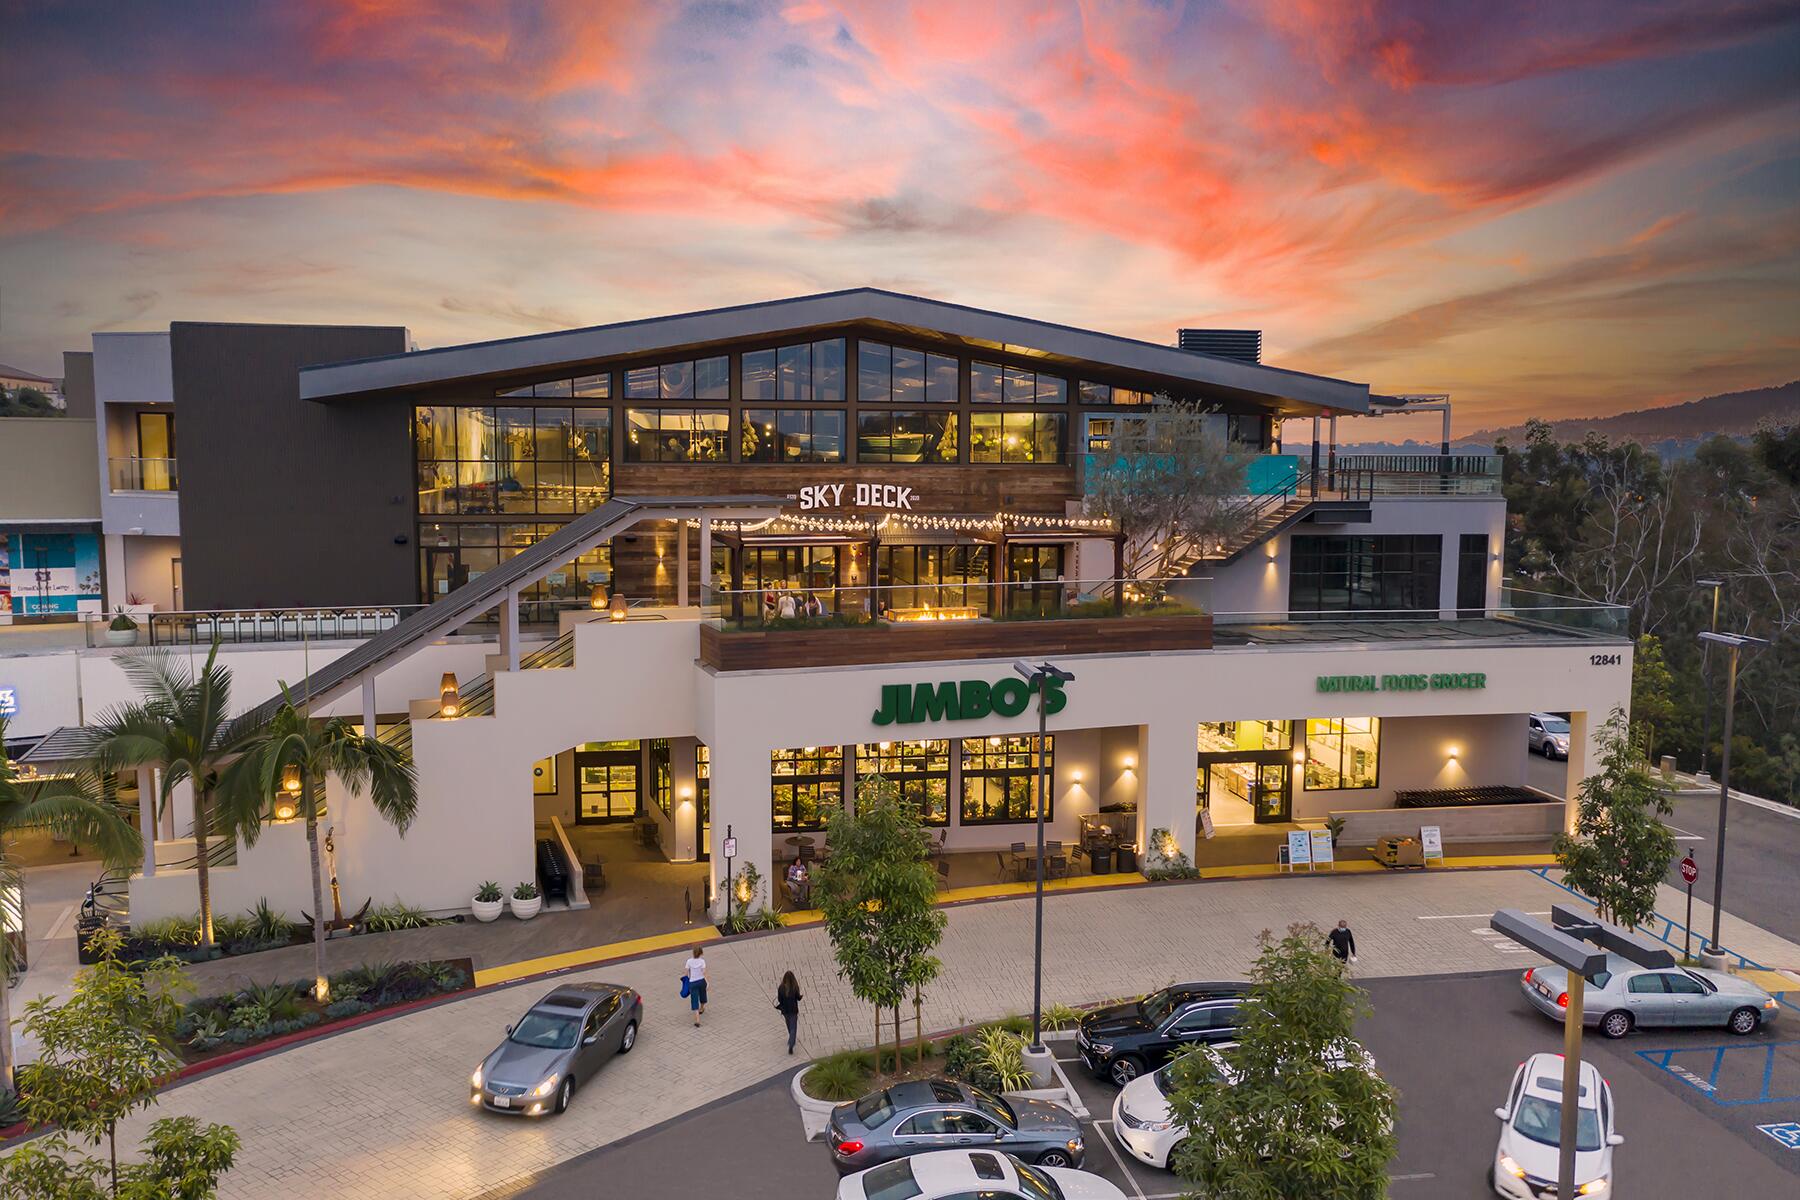 RDC Honored by AIA San Diego with Interior Architecture Merit Award for Sky Deck at Del Mar Highlands Town Center